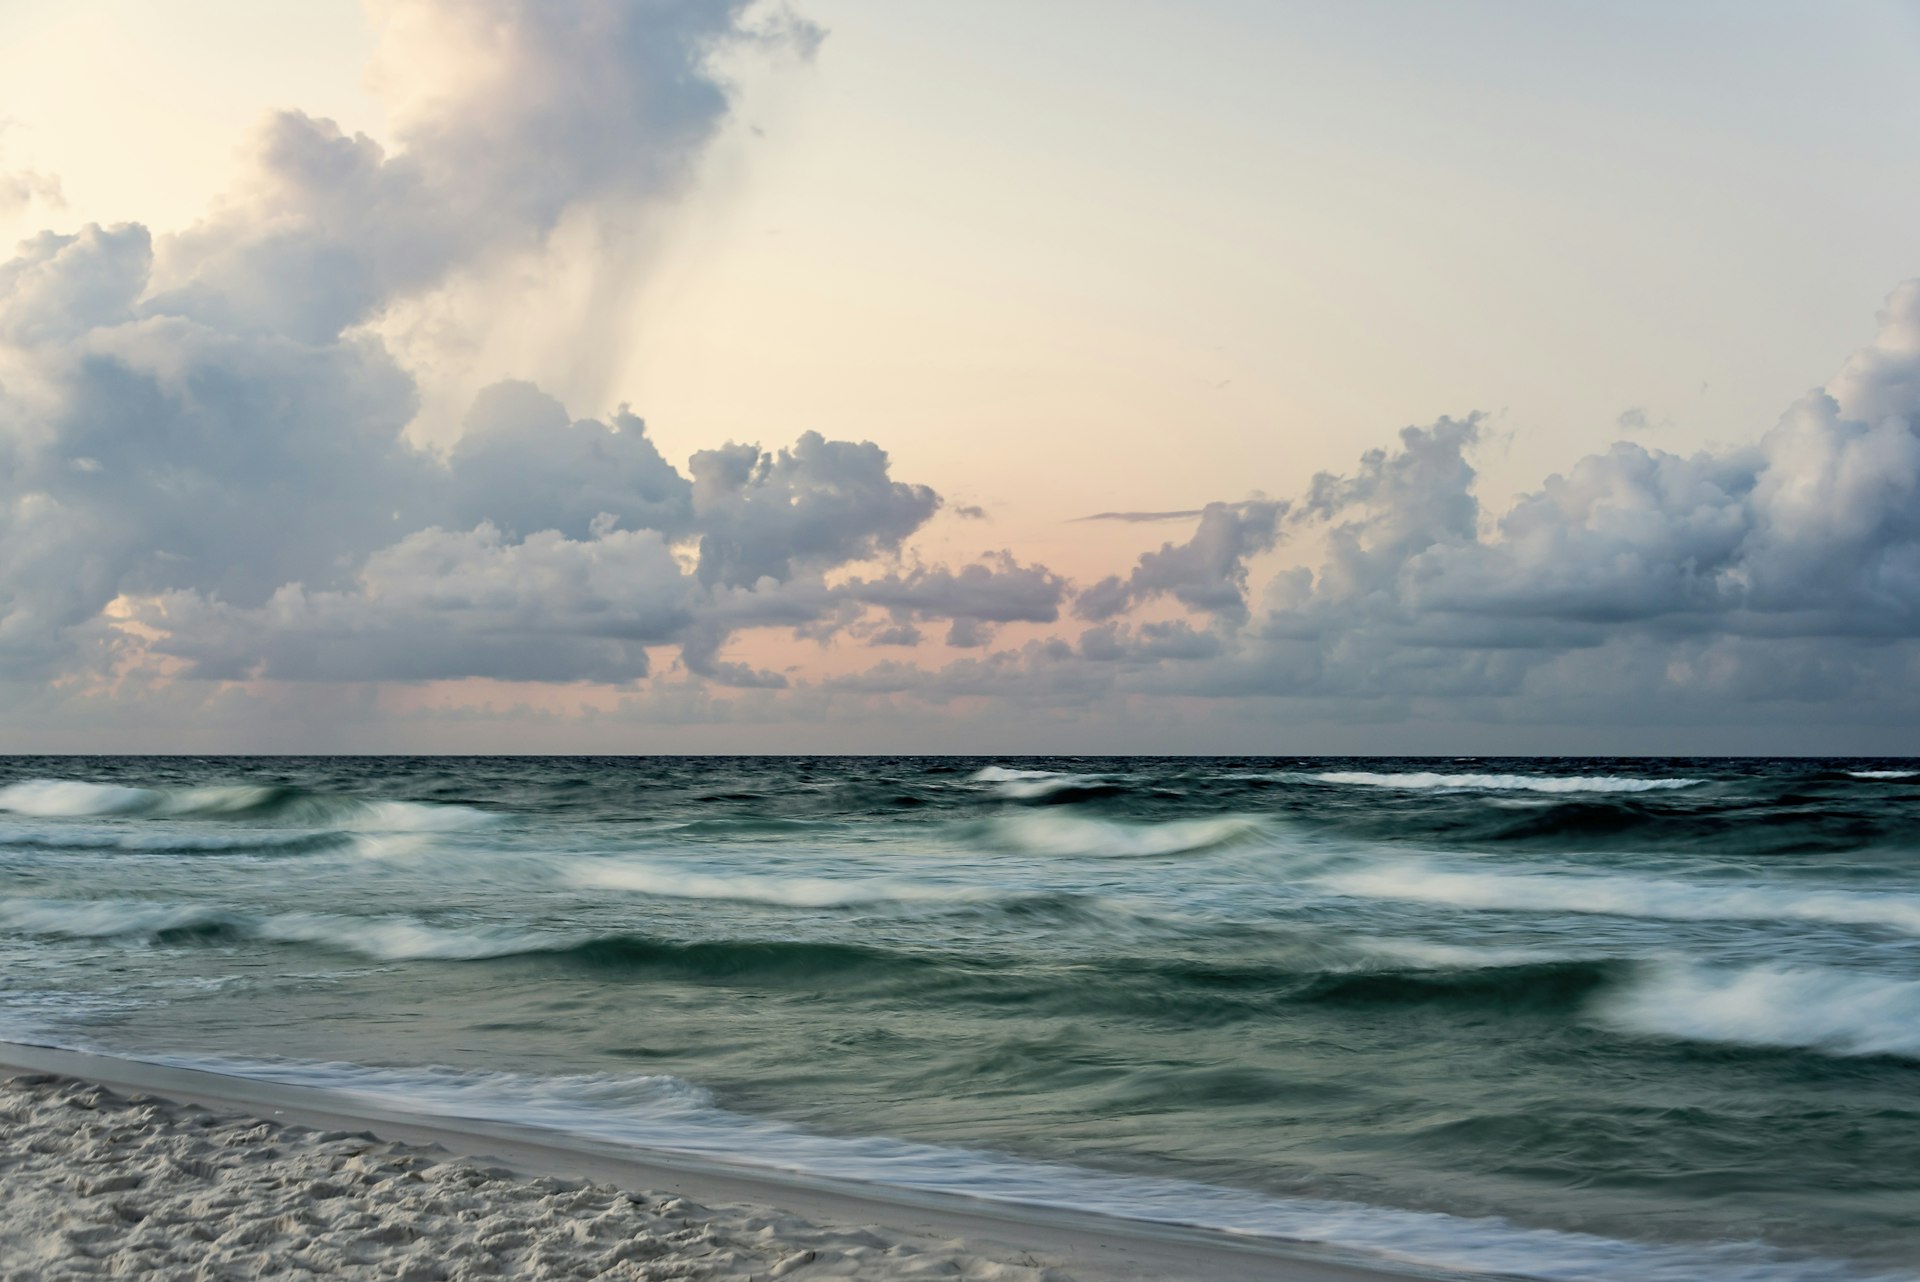 Ocean view on the Emerald Coast, Florida at sunset